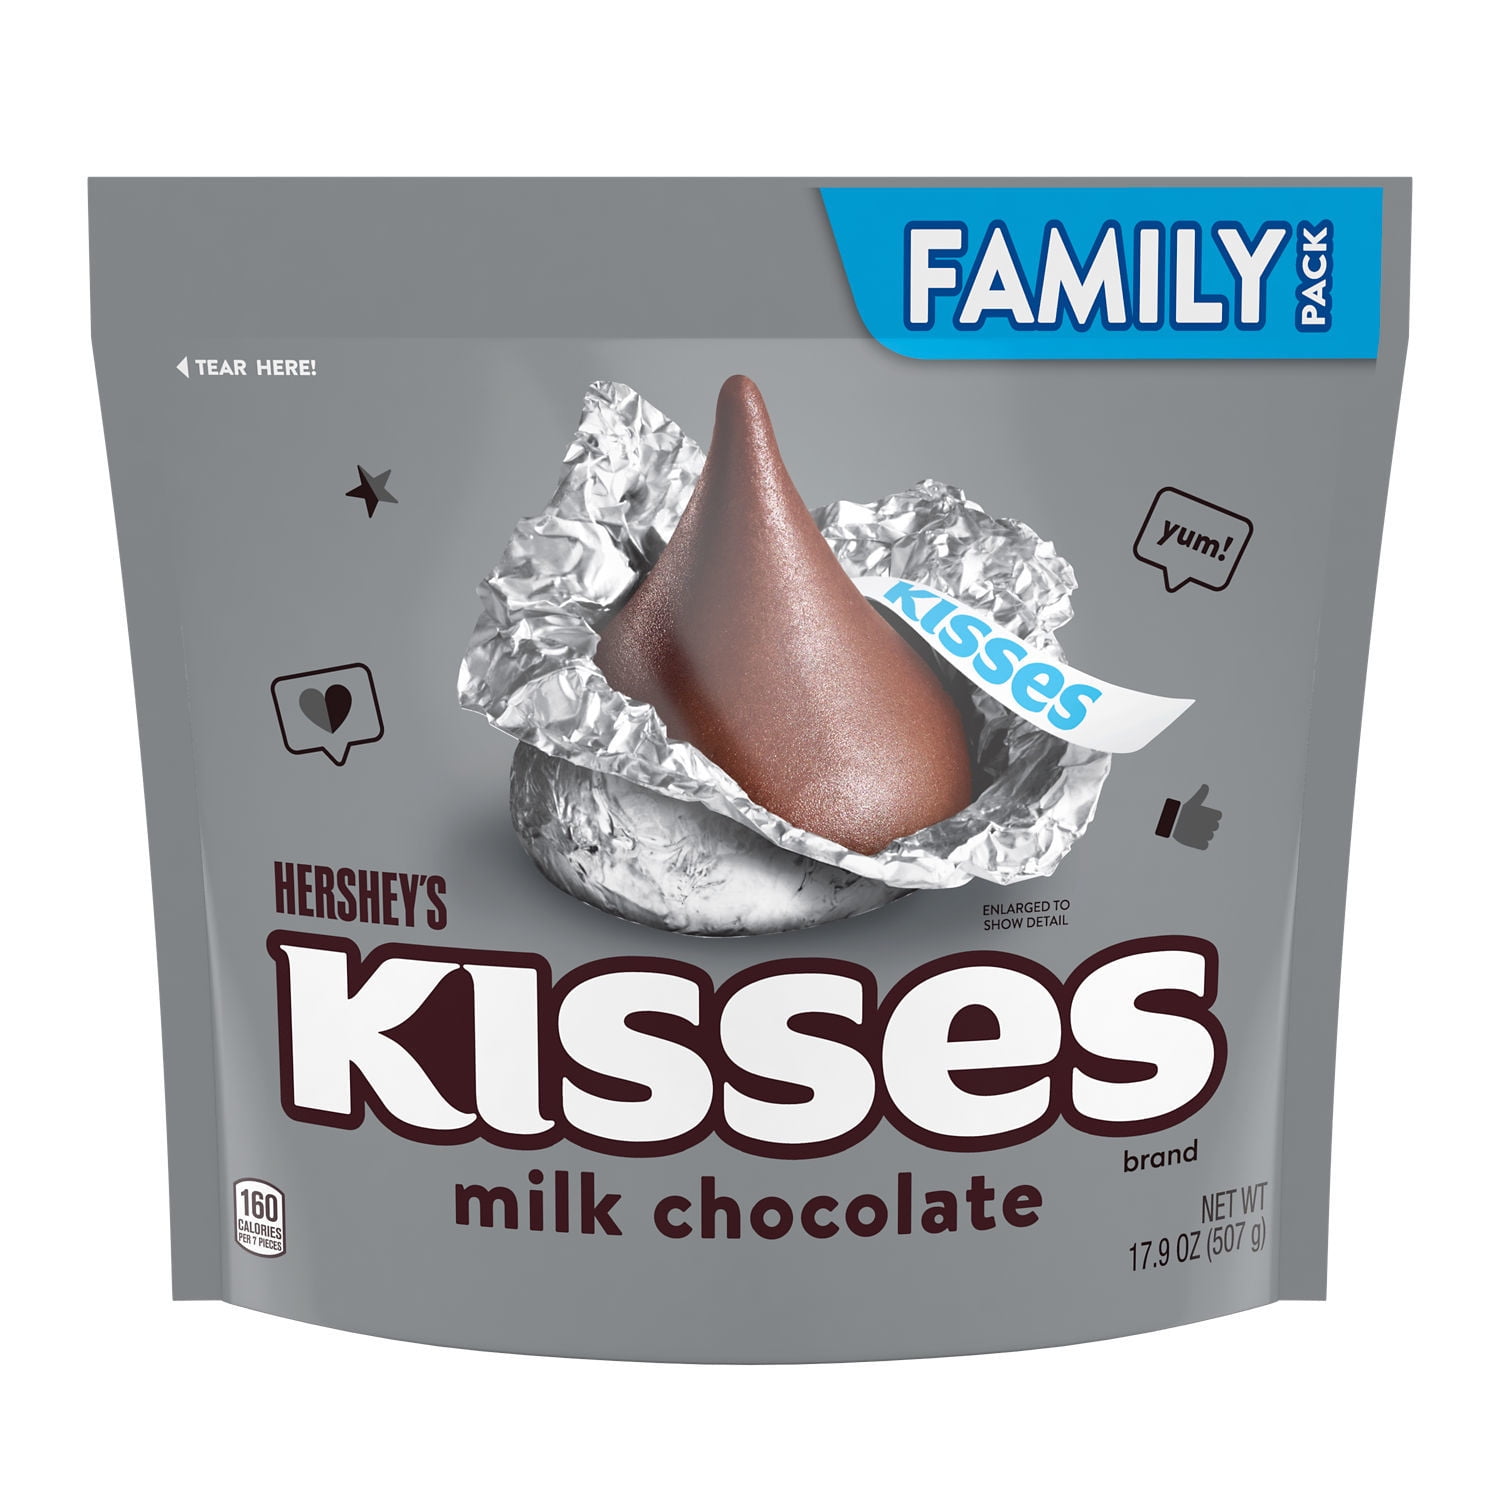 HERSHEY'S KISSES Milk Chocolate Silver Foil, Easter Candy Family Pack, 17.9 oz